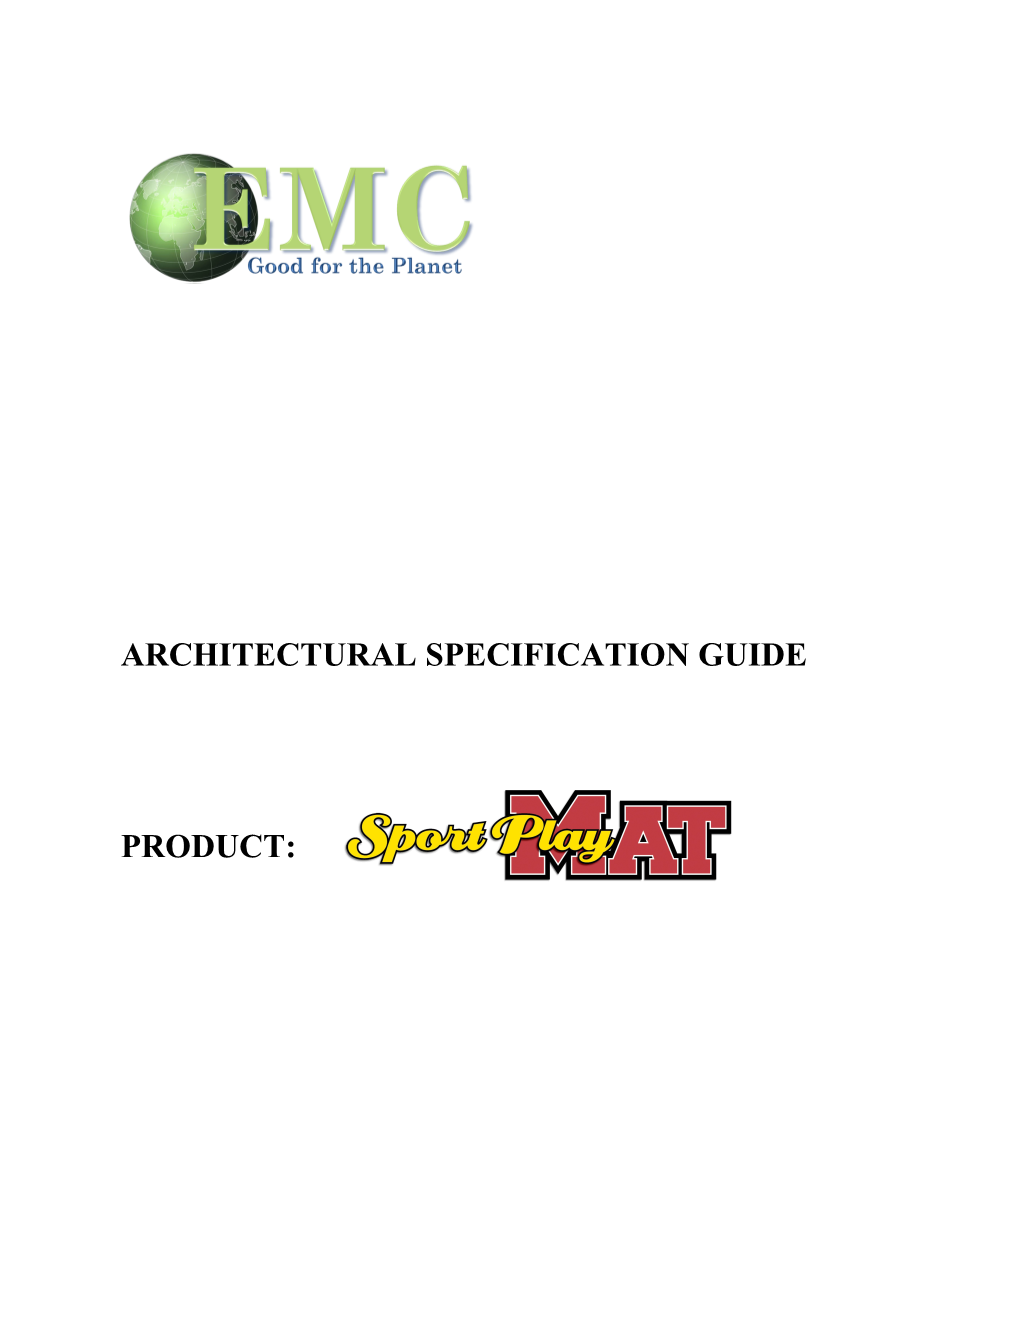 Architectural Specification Guide